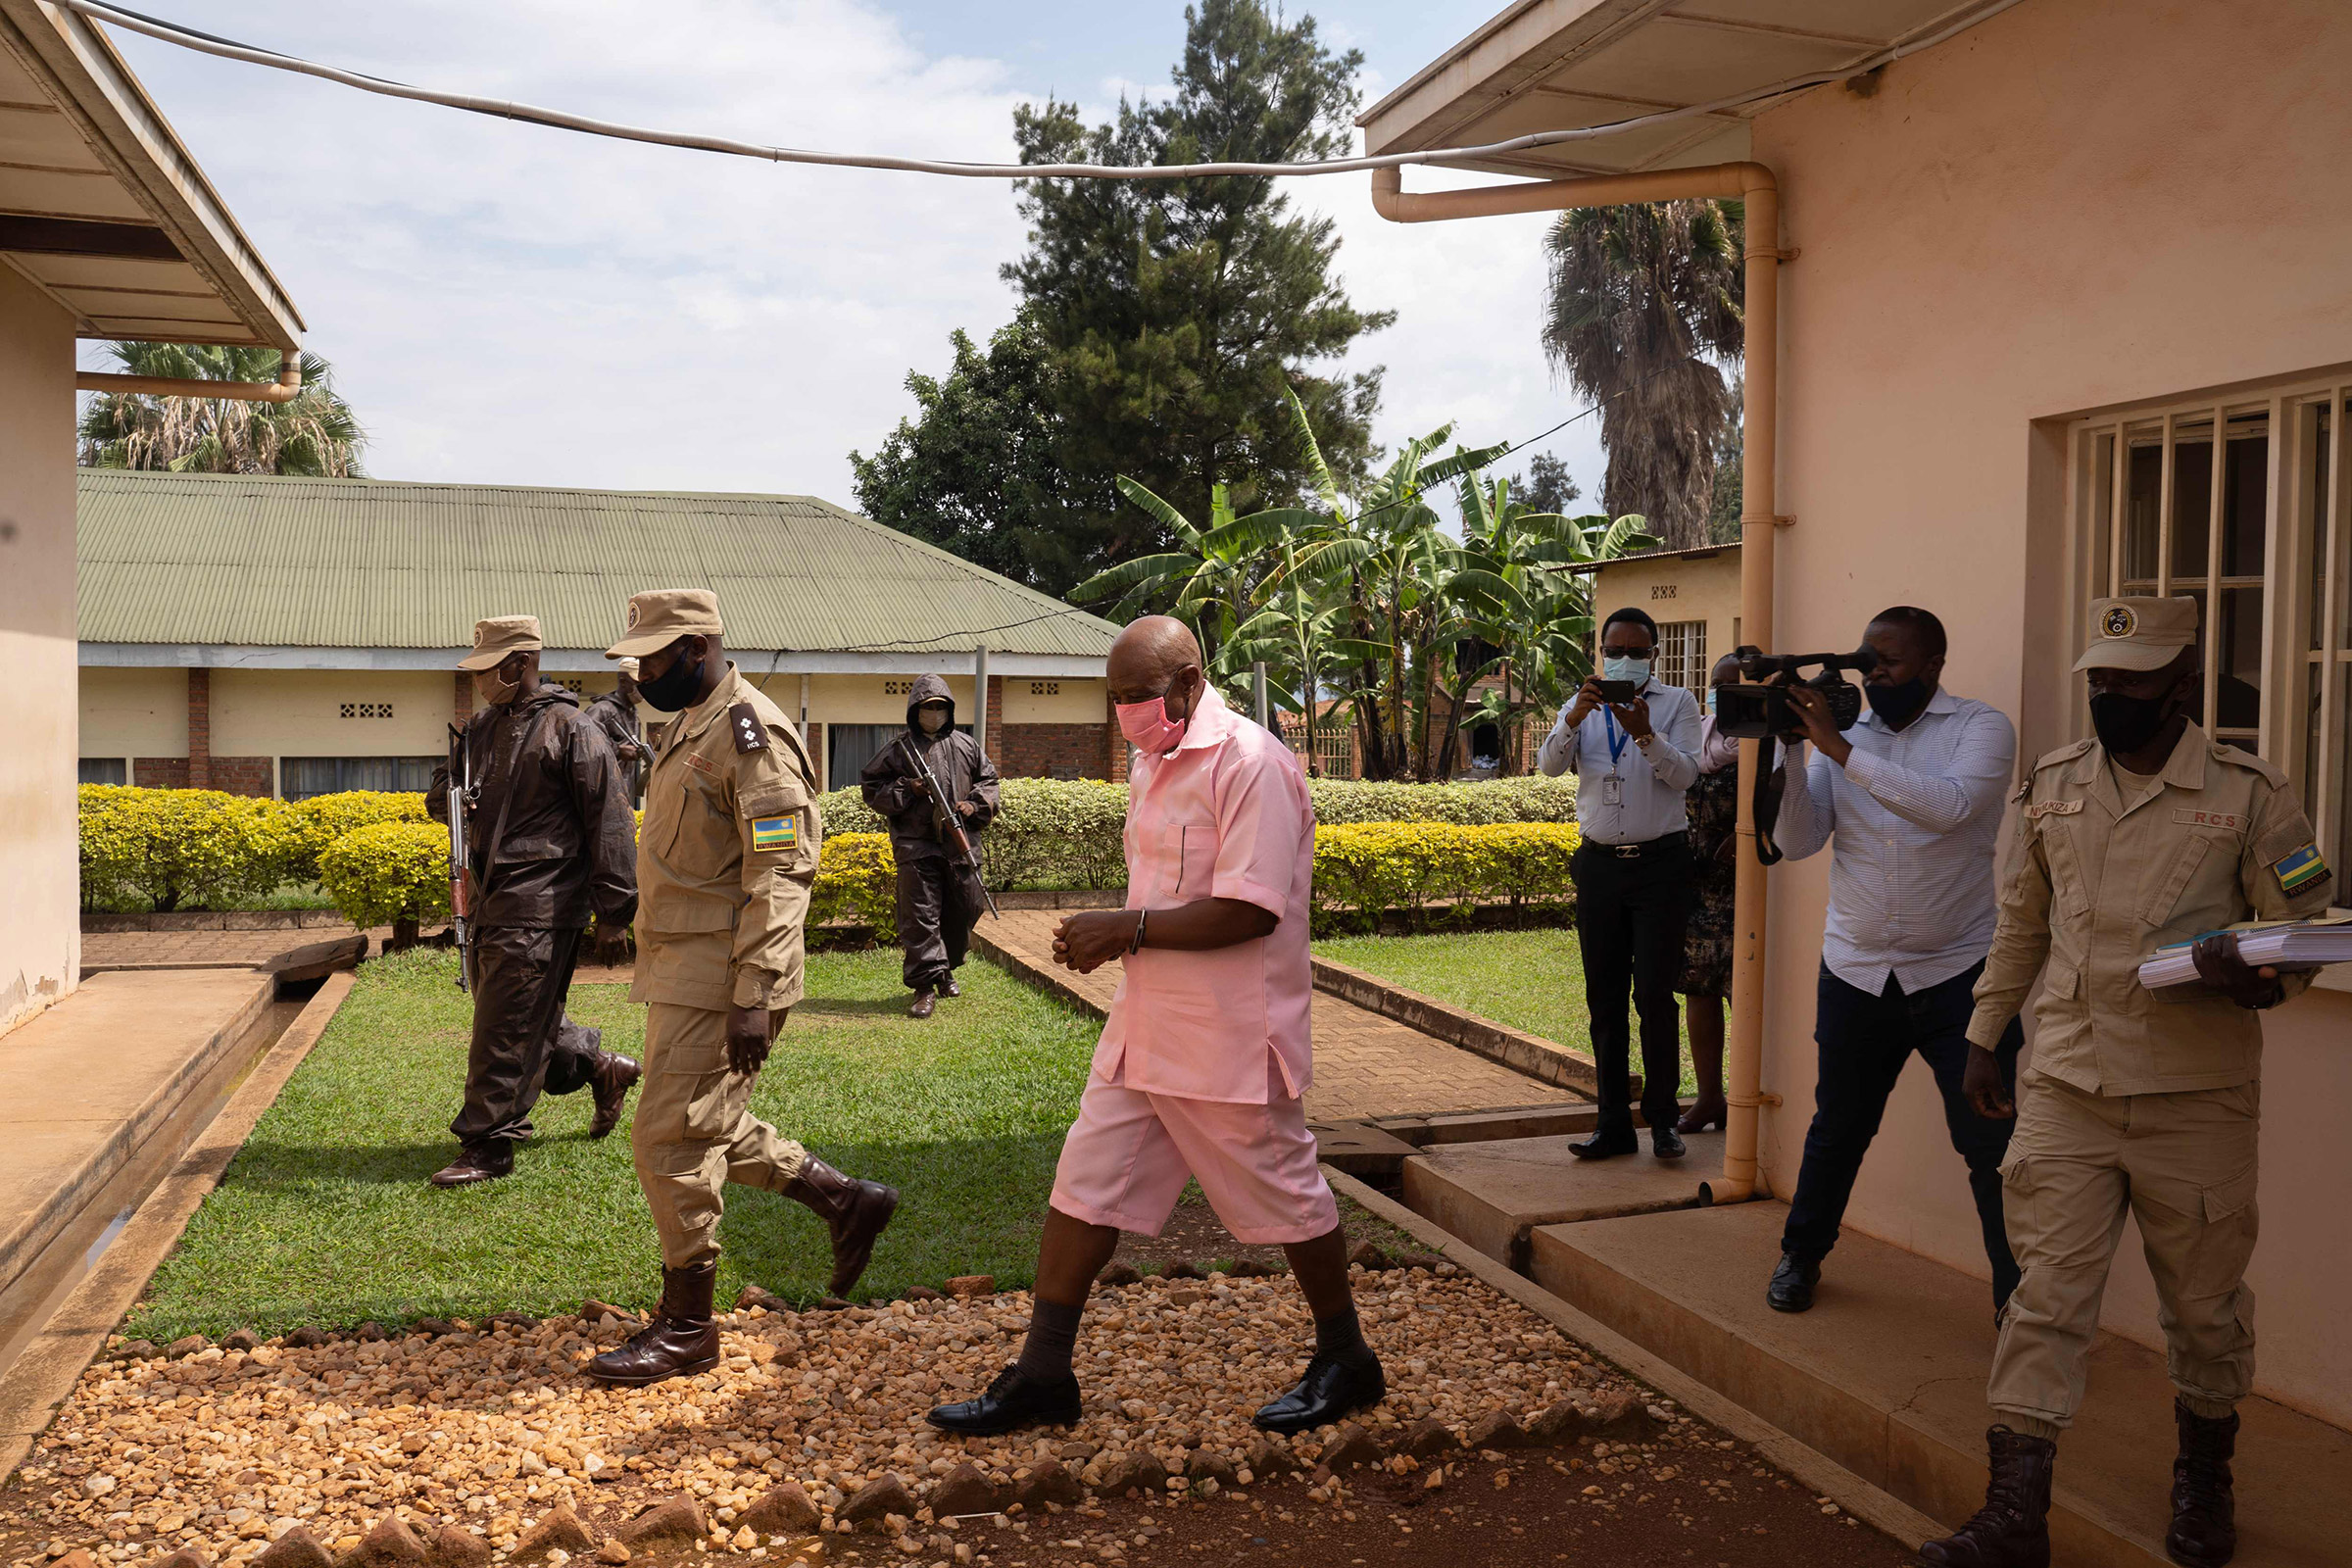 Paul Rusesabagina, center, surrounded by guards of Rwanda Correctional Service, arrives at Nyarugenge Court of Justice in Kigali, Rwanda, on Oct. 2, 2020. (Simon Wohlfahrt—AFP/Getty Images)